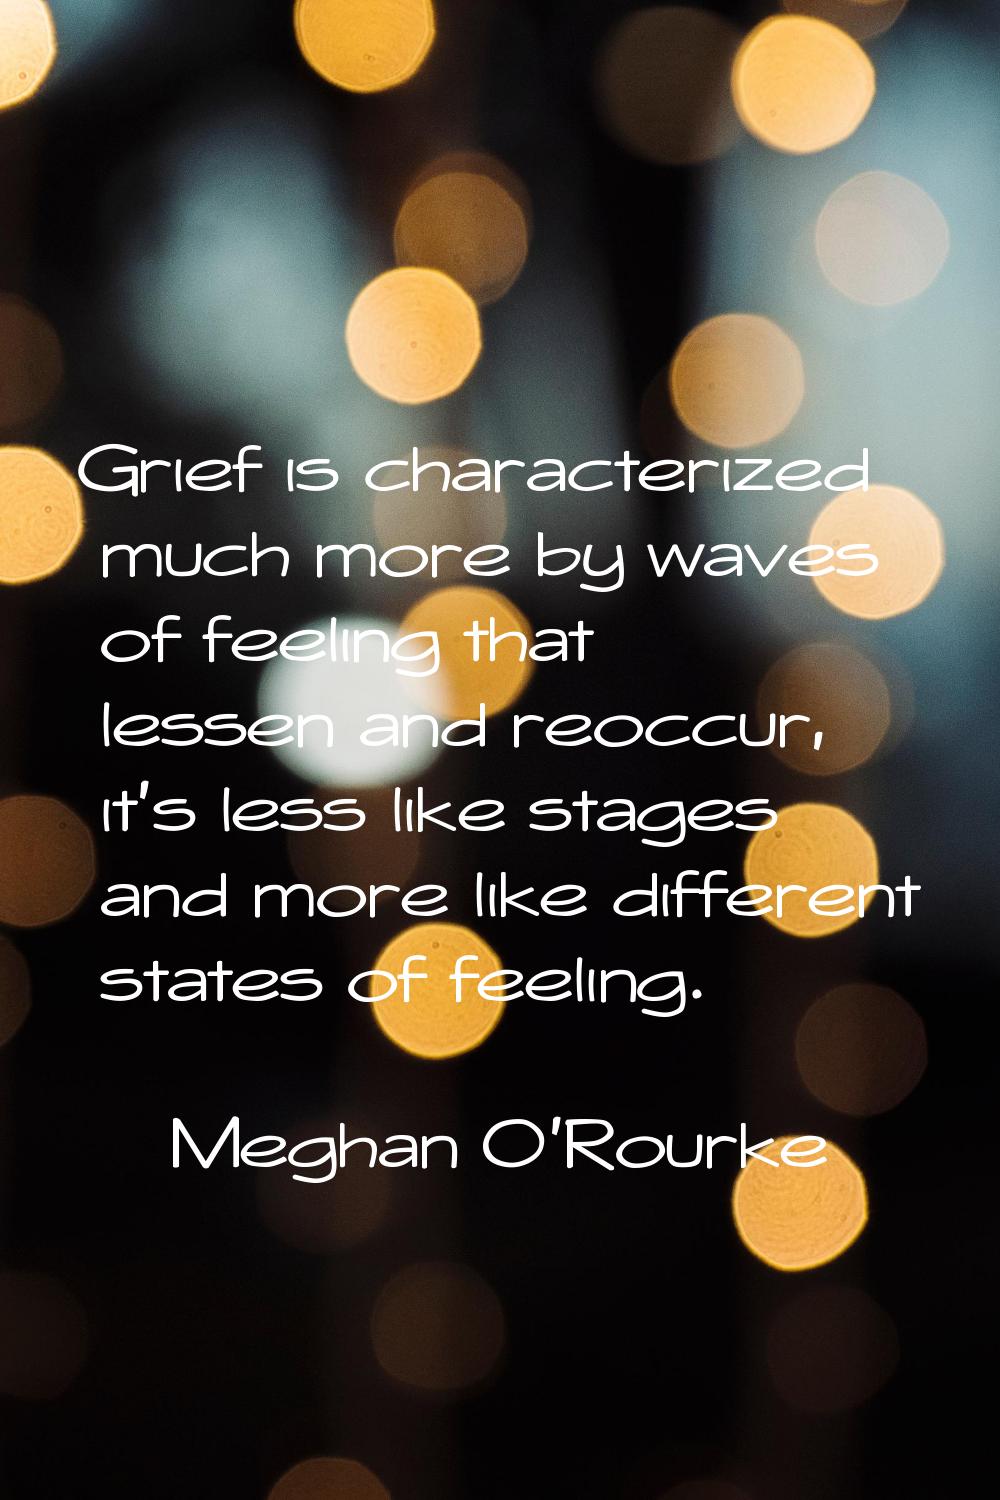 Grief is characterized much more by waves of feeling that lessen and reoccur, it's less like stages